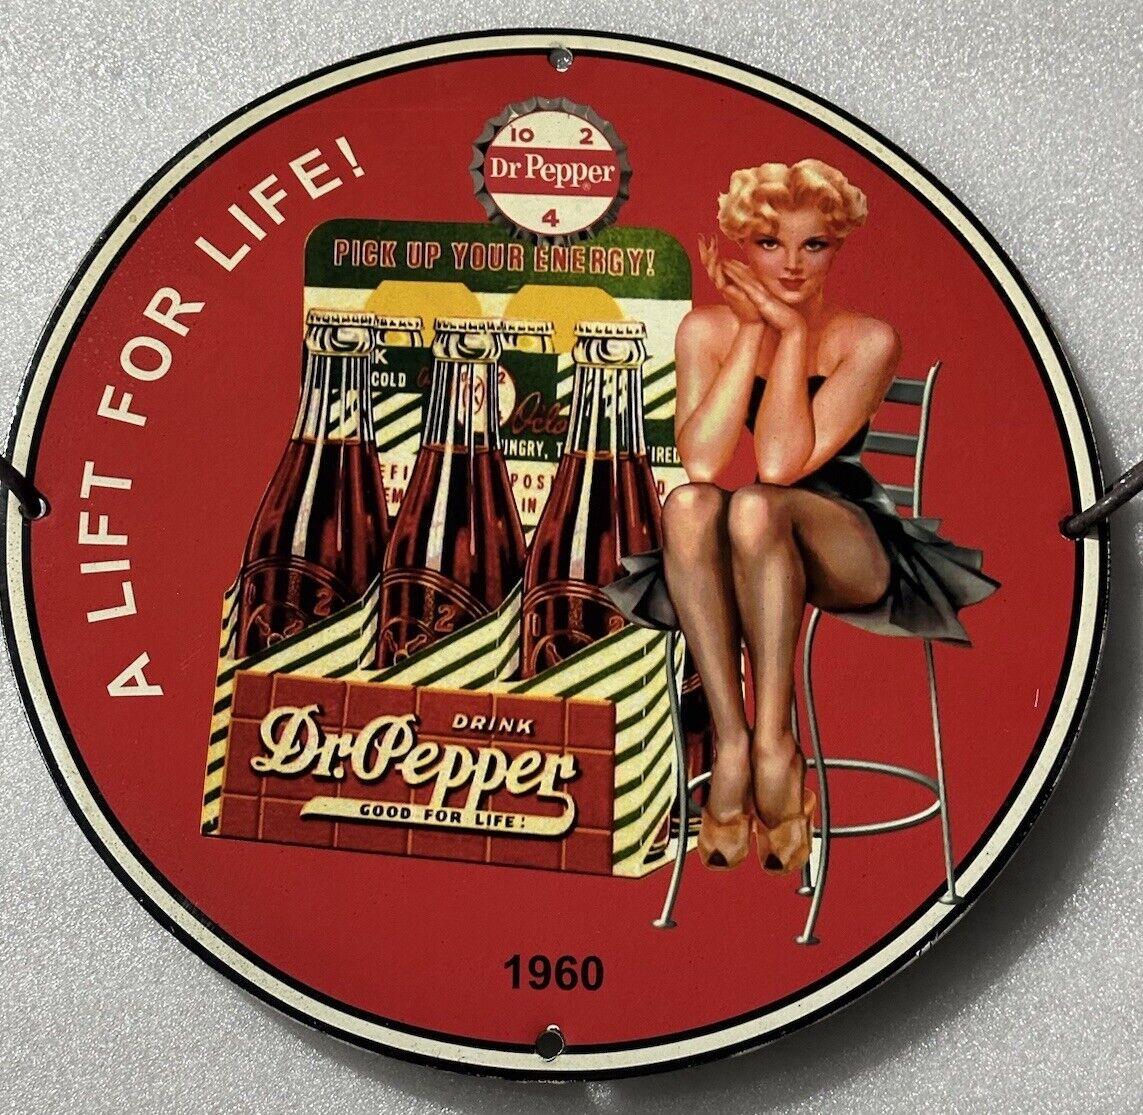 RARE DR PEPPER DRINK 1960 RETRO STYLE SEXY-GIRL PINUP PORCELAIN ENAMEL SIGN.